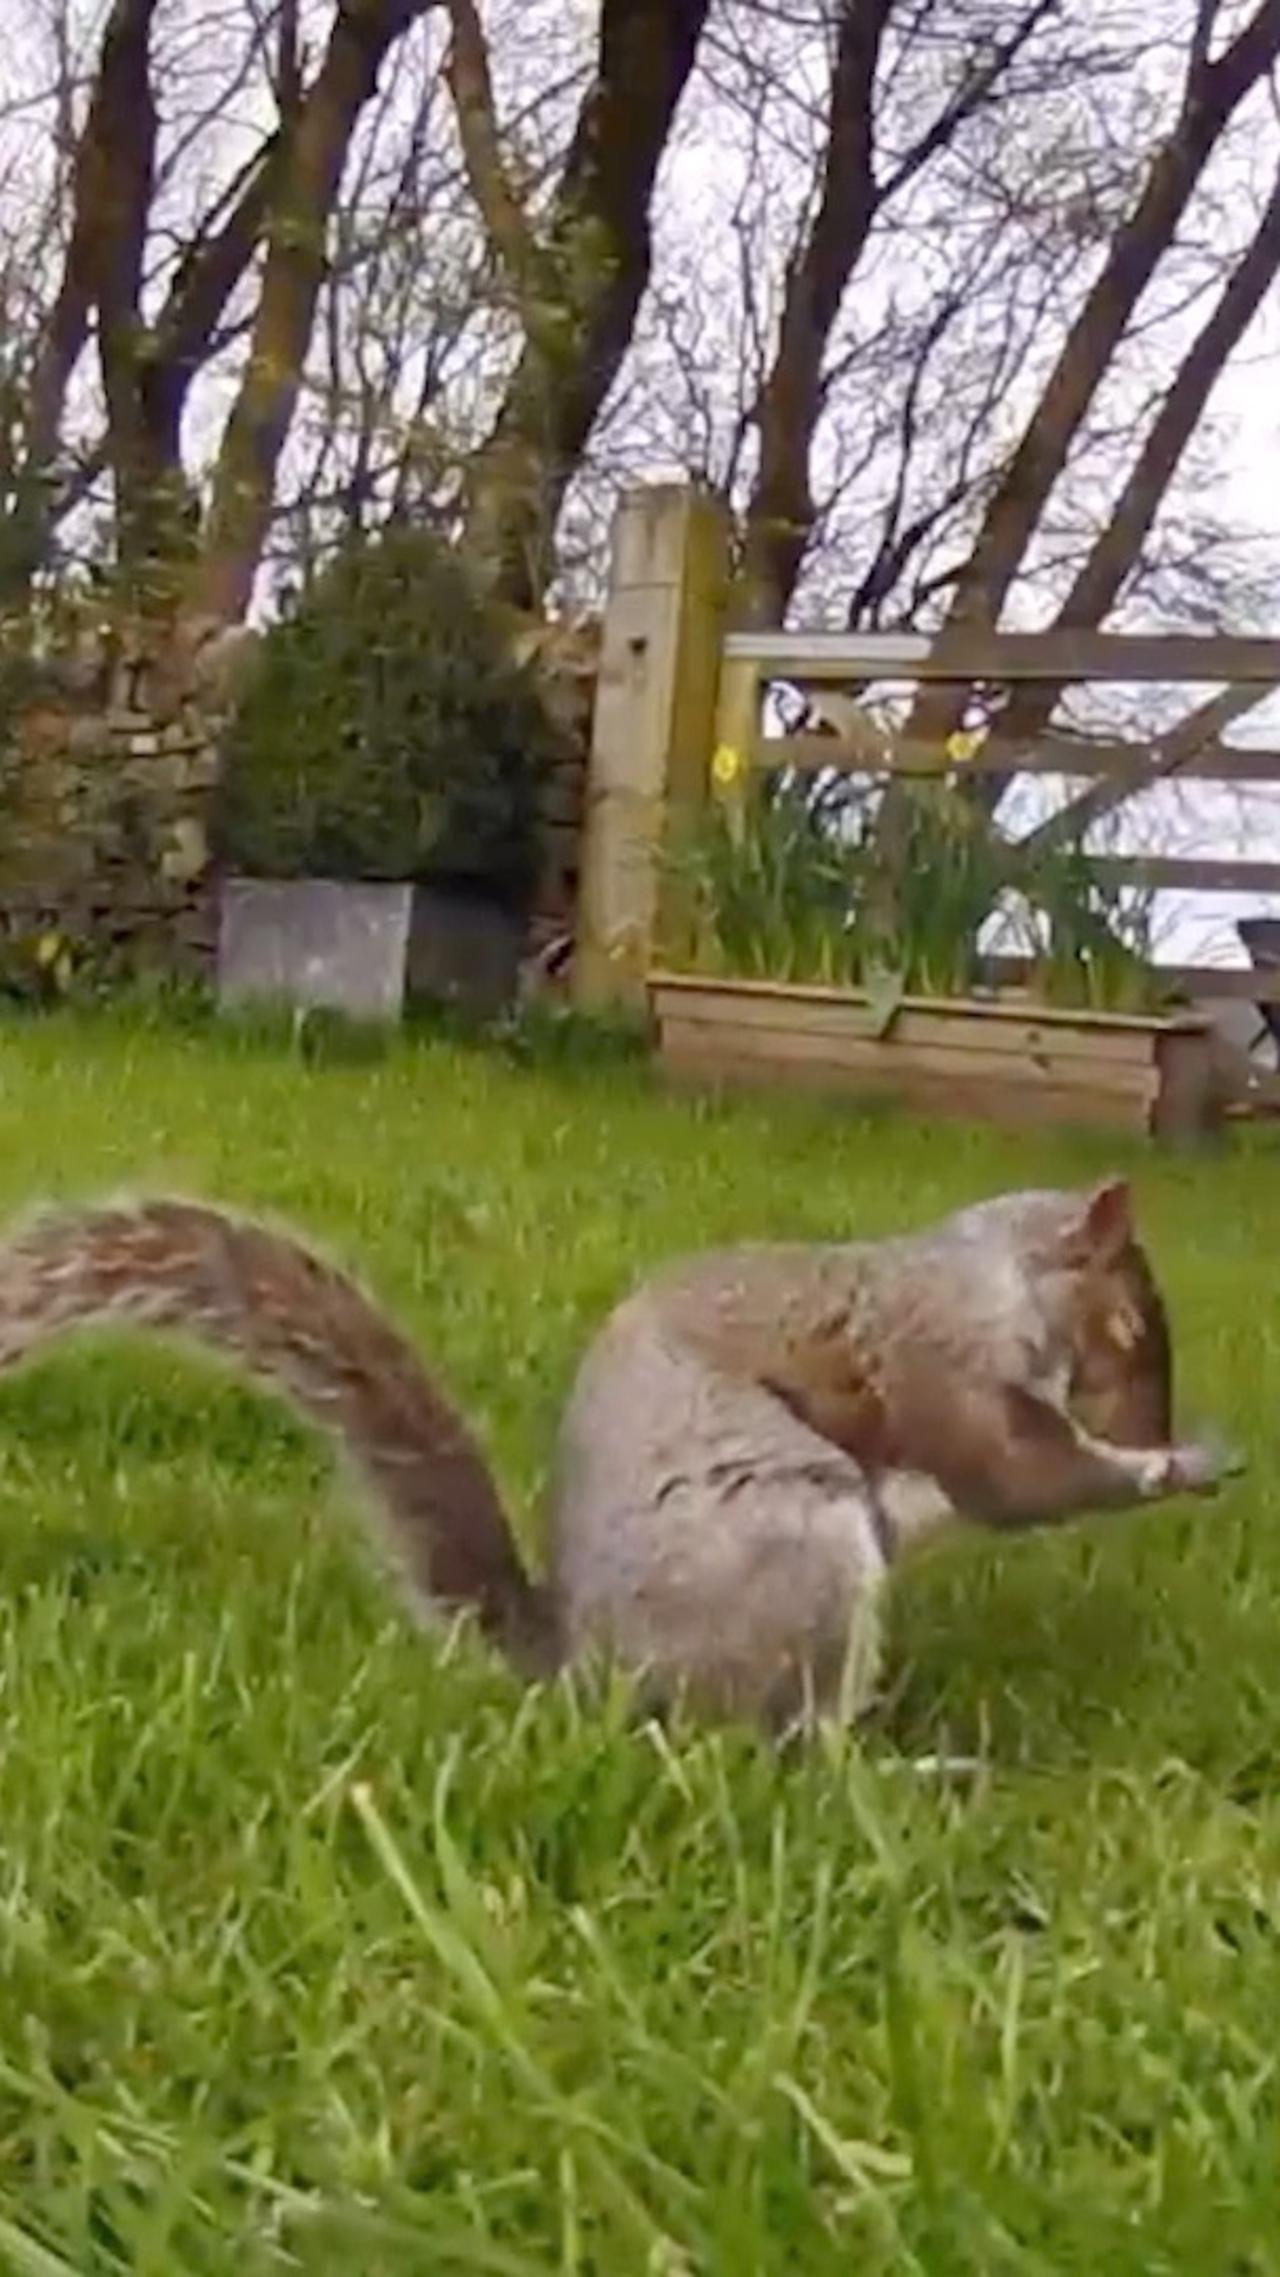 Perhaps the Most Adorable Squirrel Footage You’ll Ever See